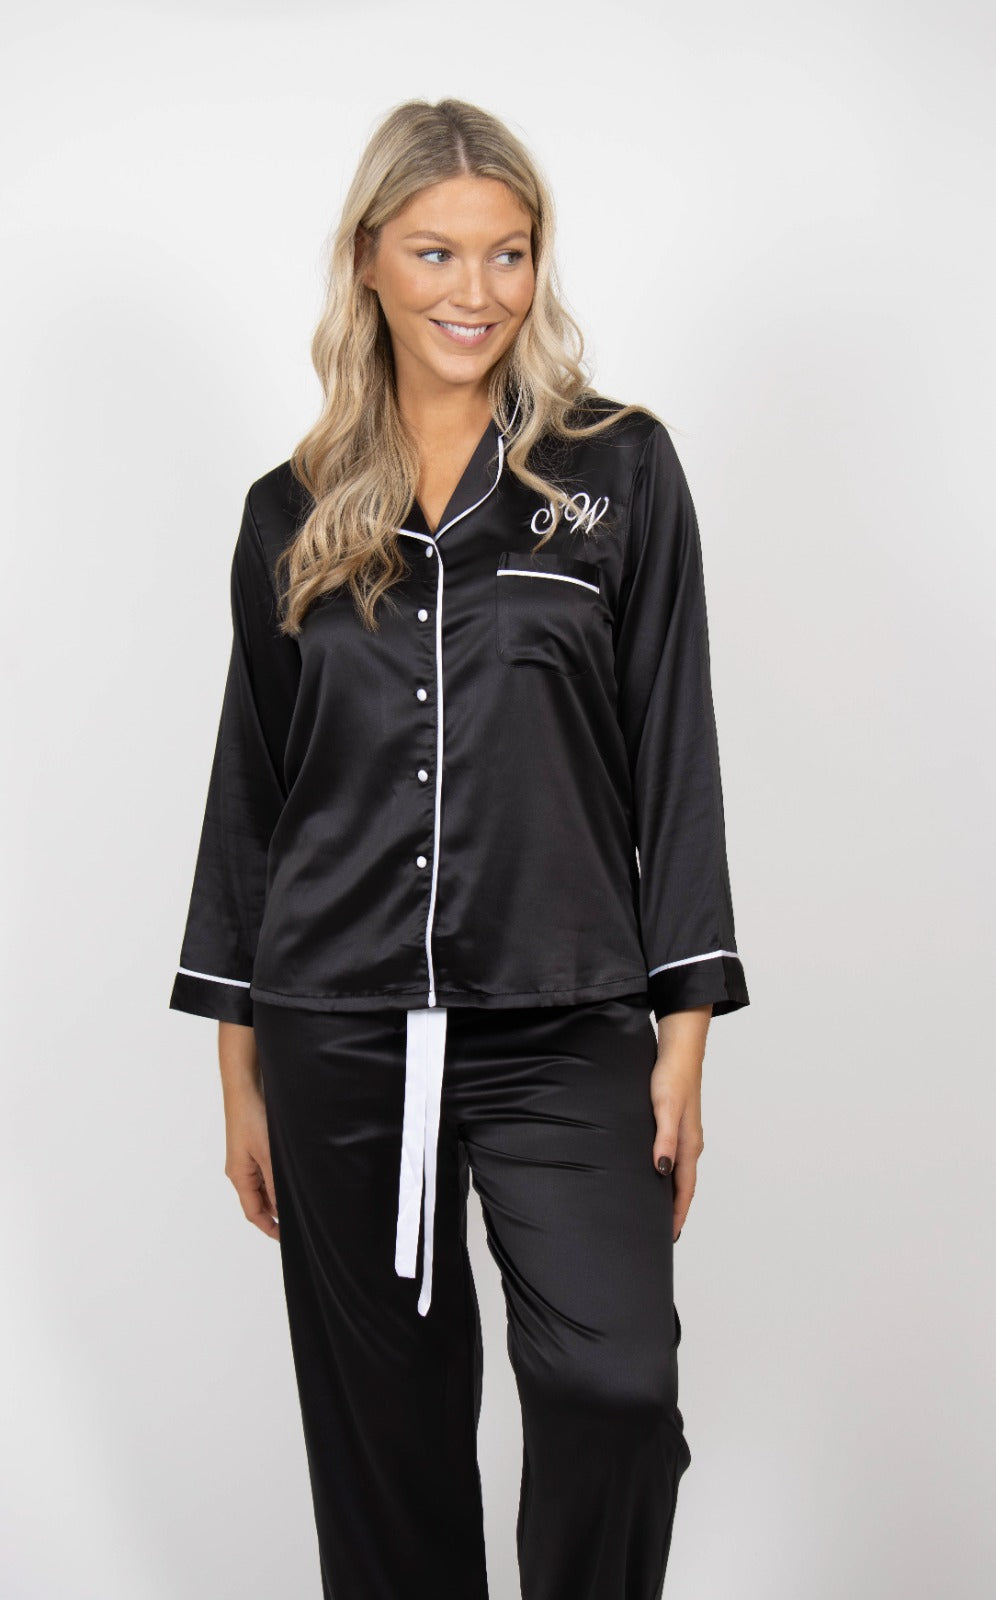 Long luxurious Silky Feel Black Satin full length Robe with piping and matching long pjs set